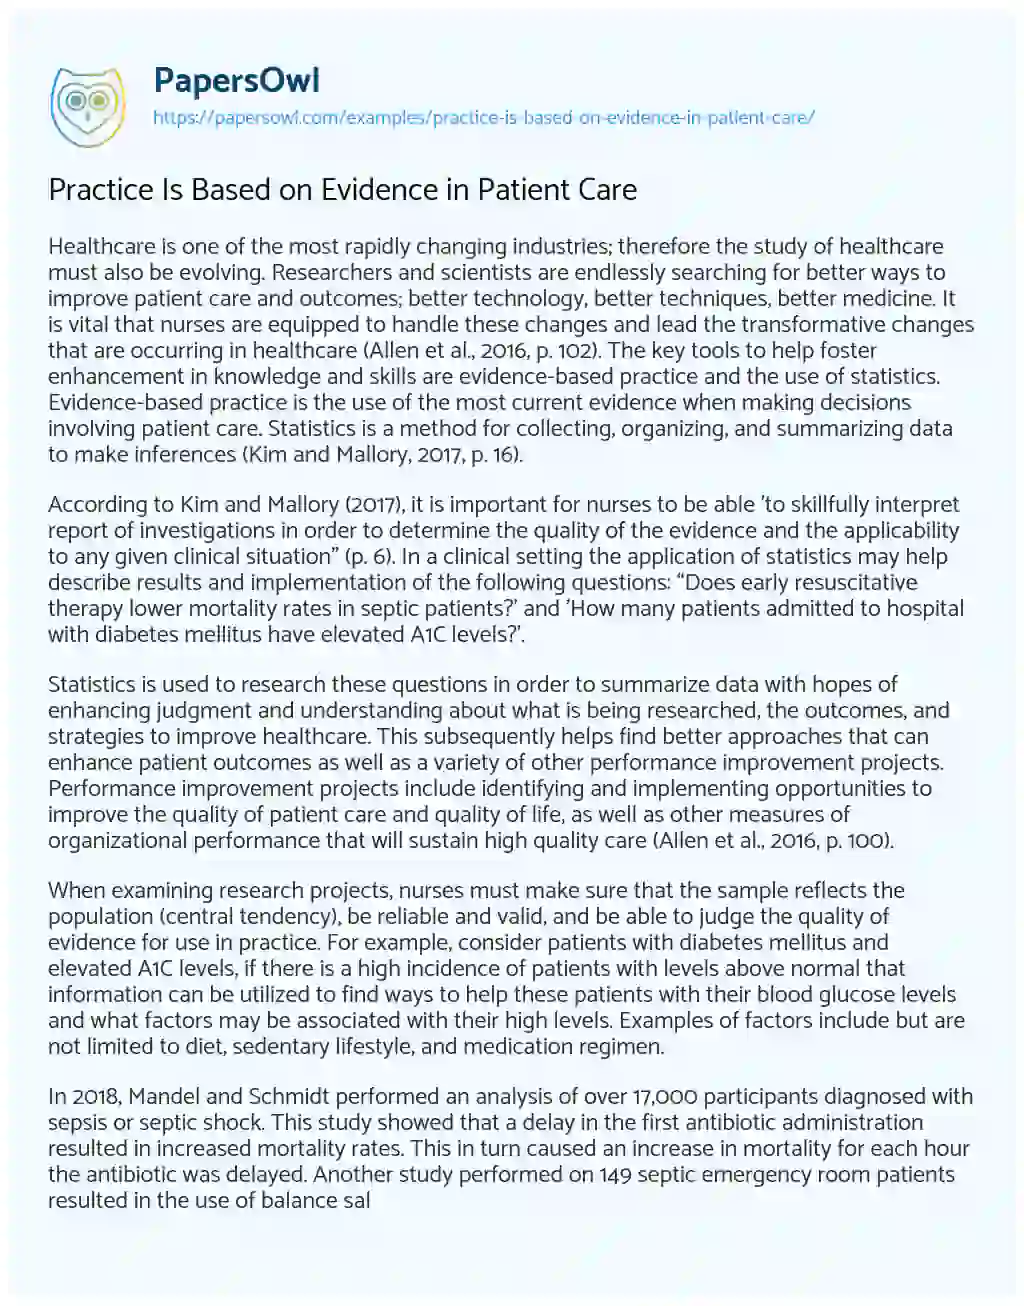 Essay on Practice is Based on Evidence in Patient Care